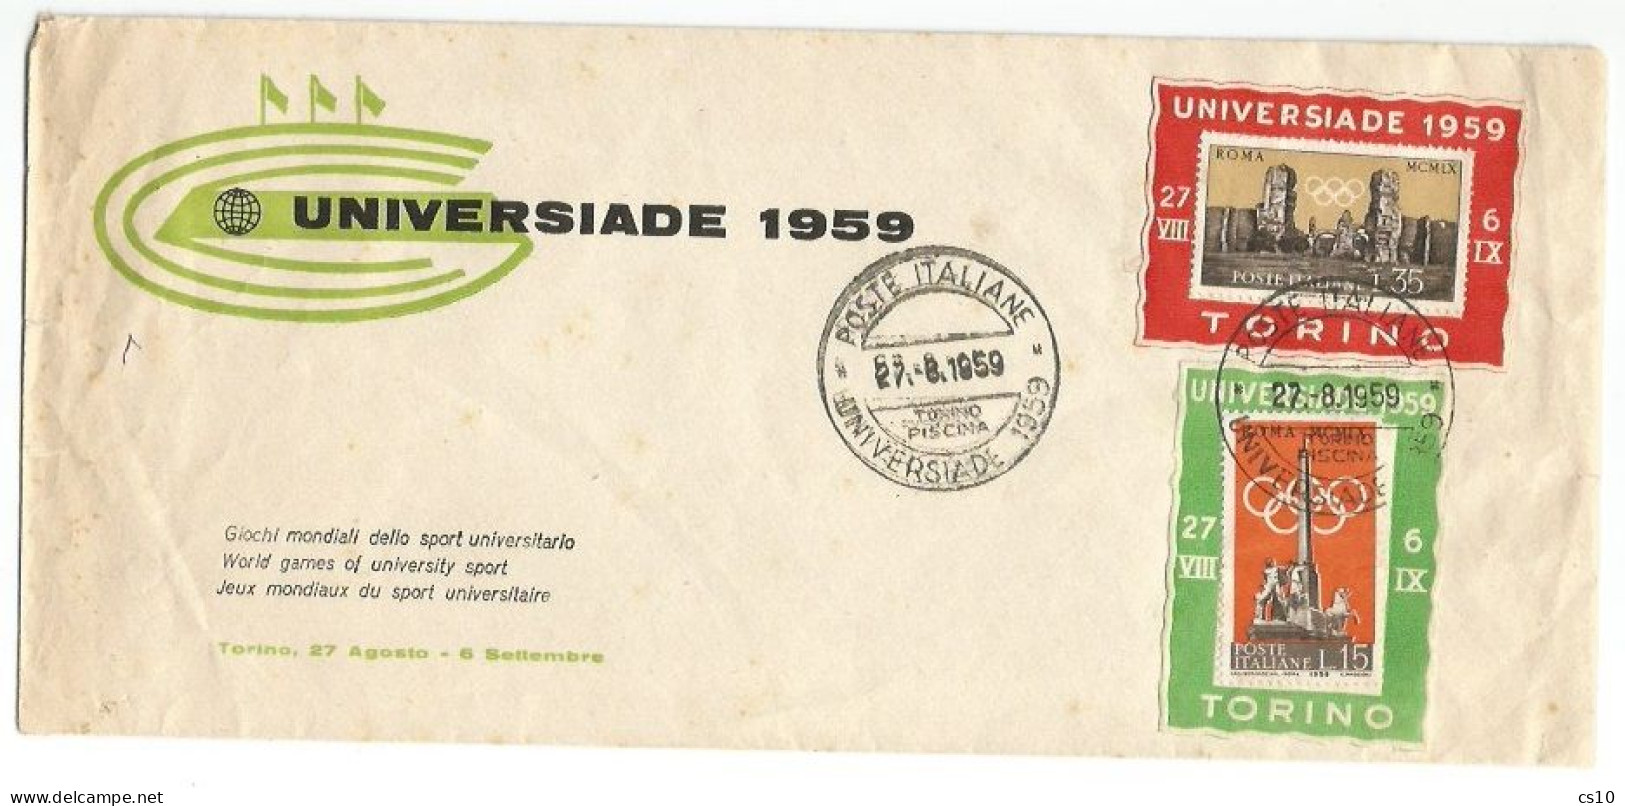 Universiadi 1959 University Games Torino Italy Swimming Nuoto Piscina 27aug59 Official Cover + PPC With Official Labels - Swimming